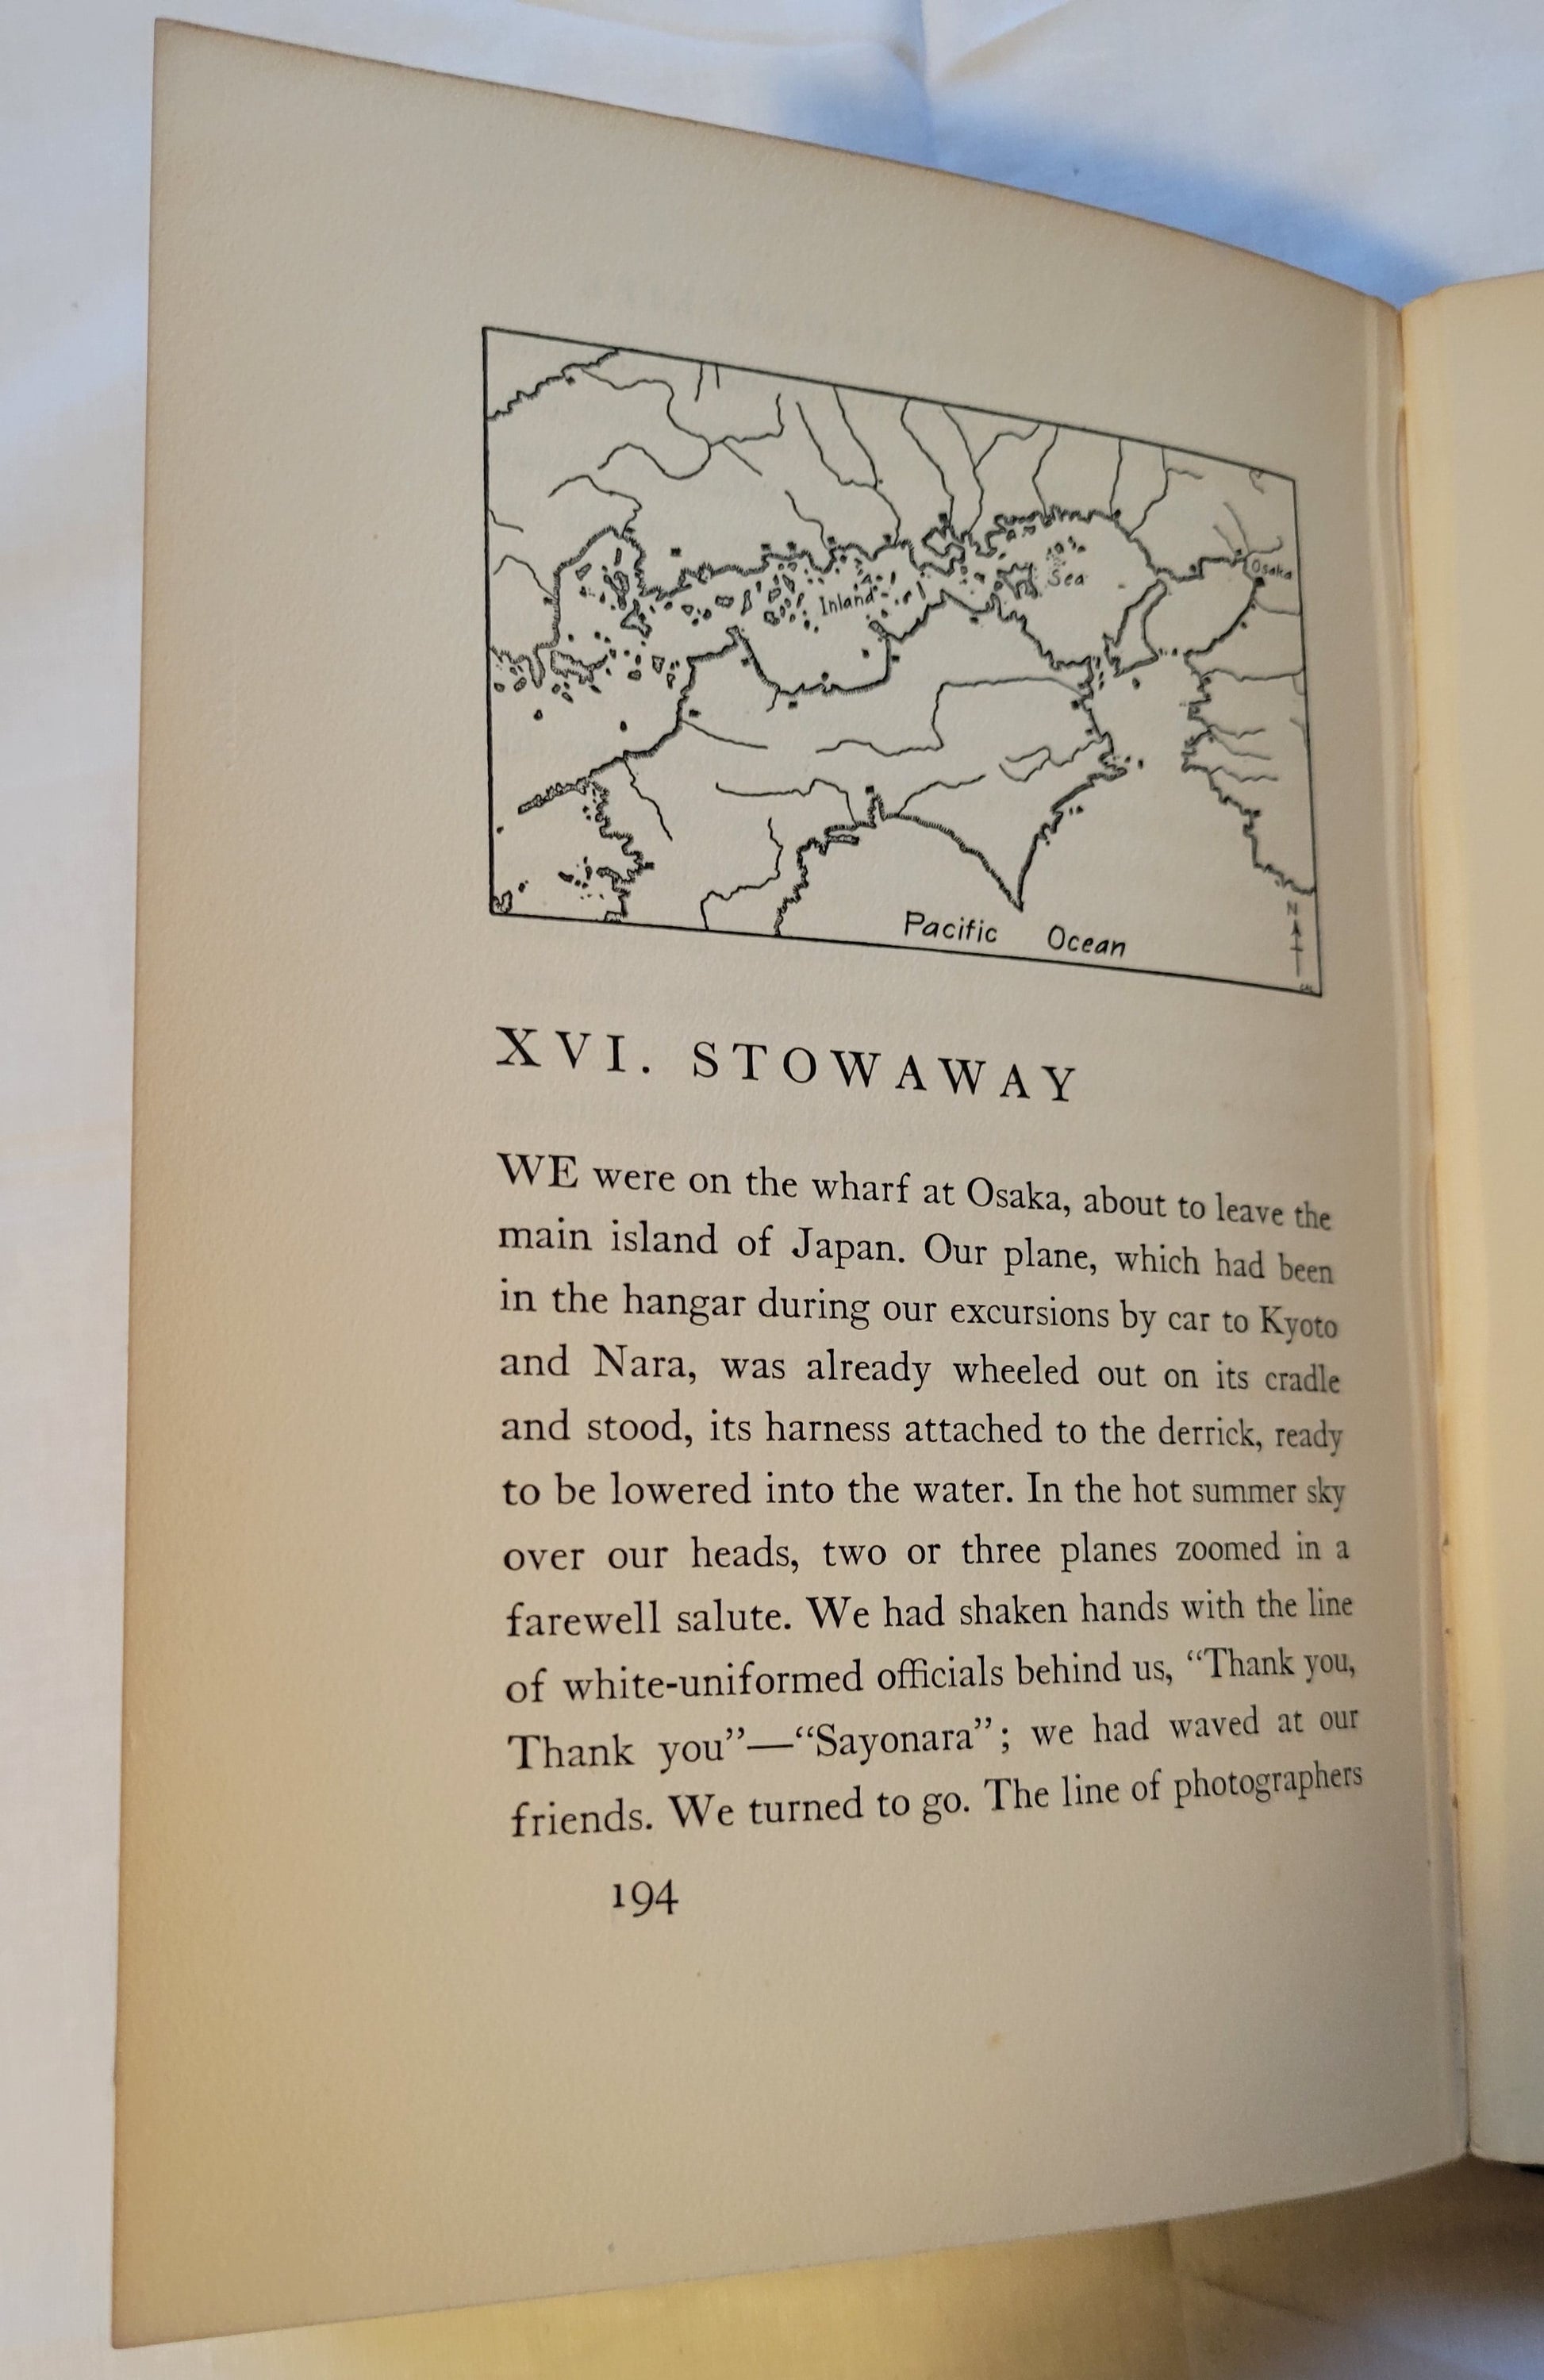 Vitnage book for sale, "North to the Orient" by Anne Morrow Lindbergh, with maps by Charles A. Lindbergh, published by Quinn & Boden Company, Inc. in 1935. View of page 194